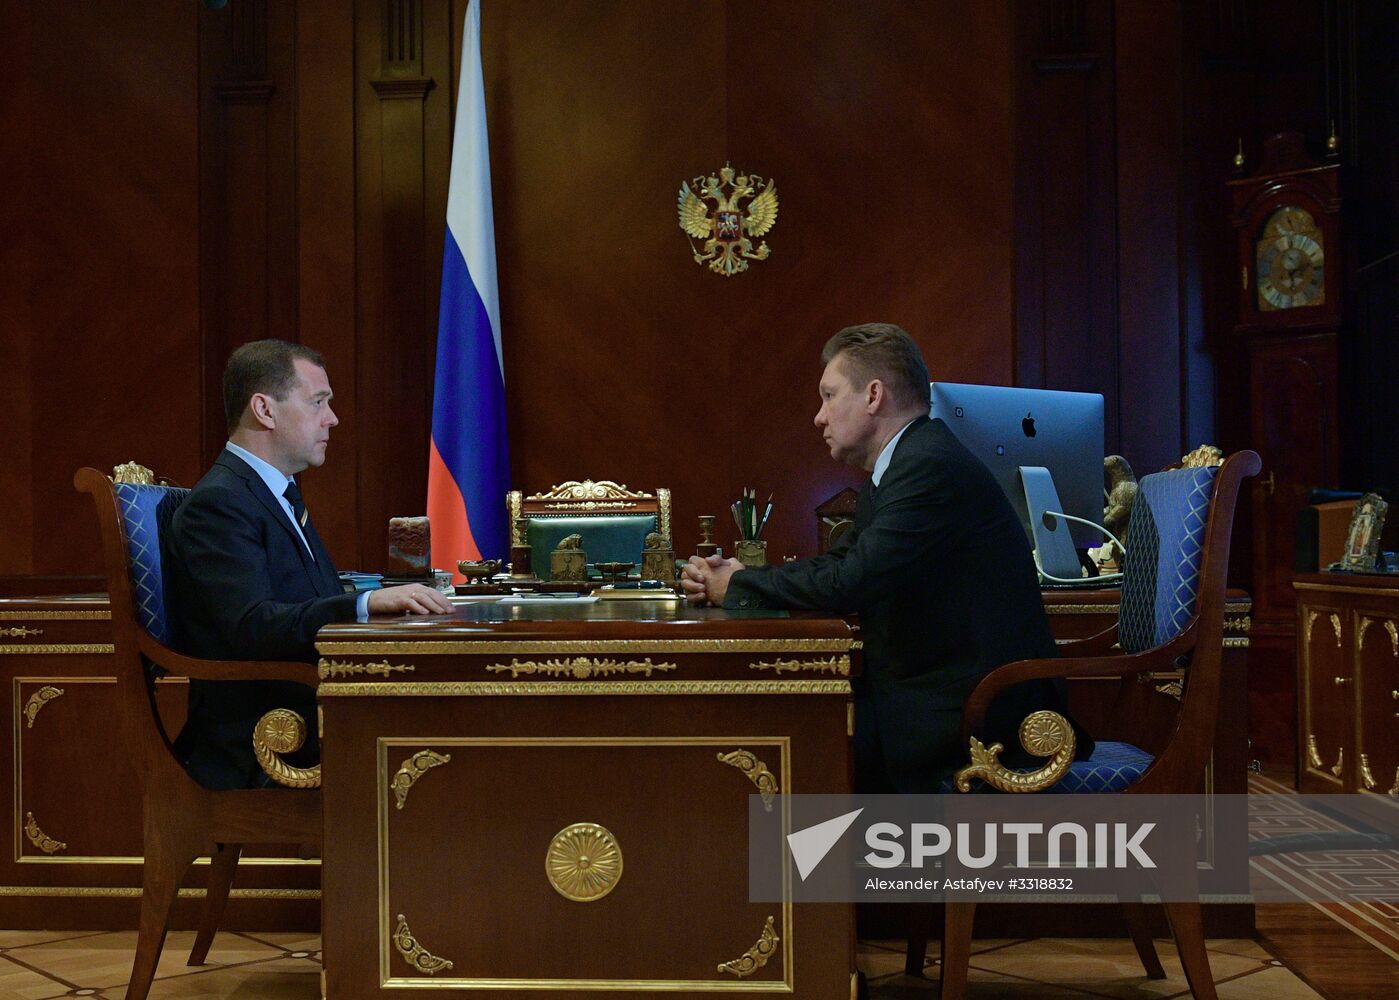 Russian Prime Minister Dmitry Medvedev meets with Gazprom CEO Alexei Miller